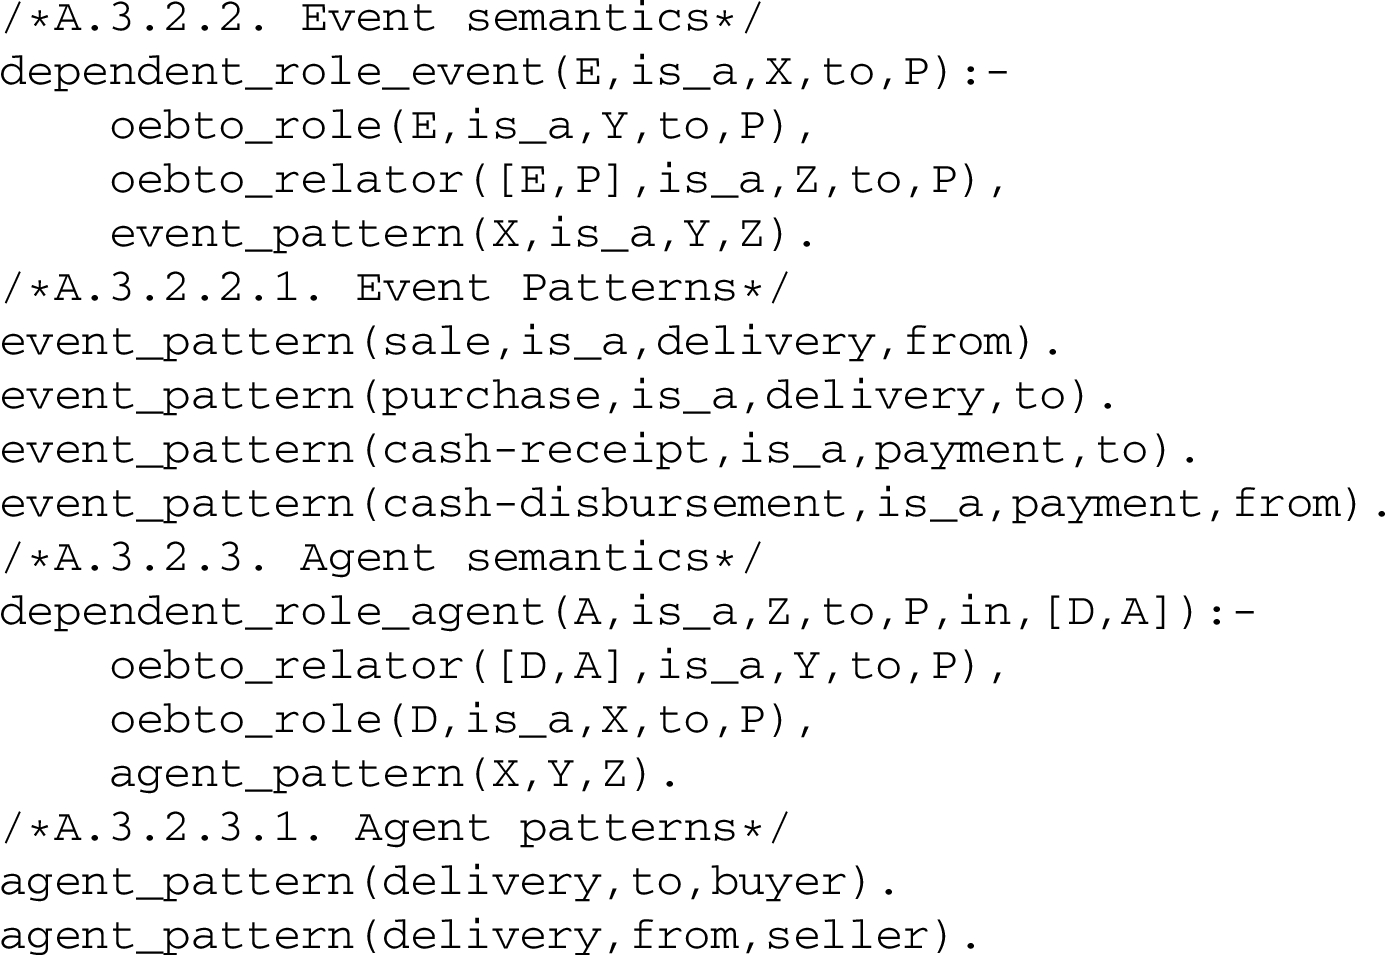 Derives event and agent roles from to and from statements.